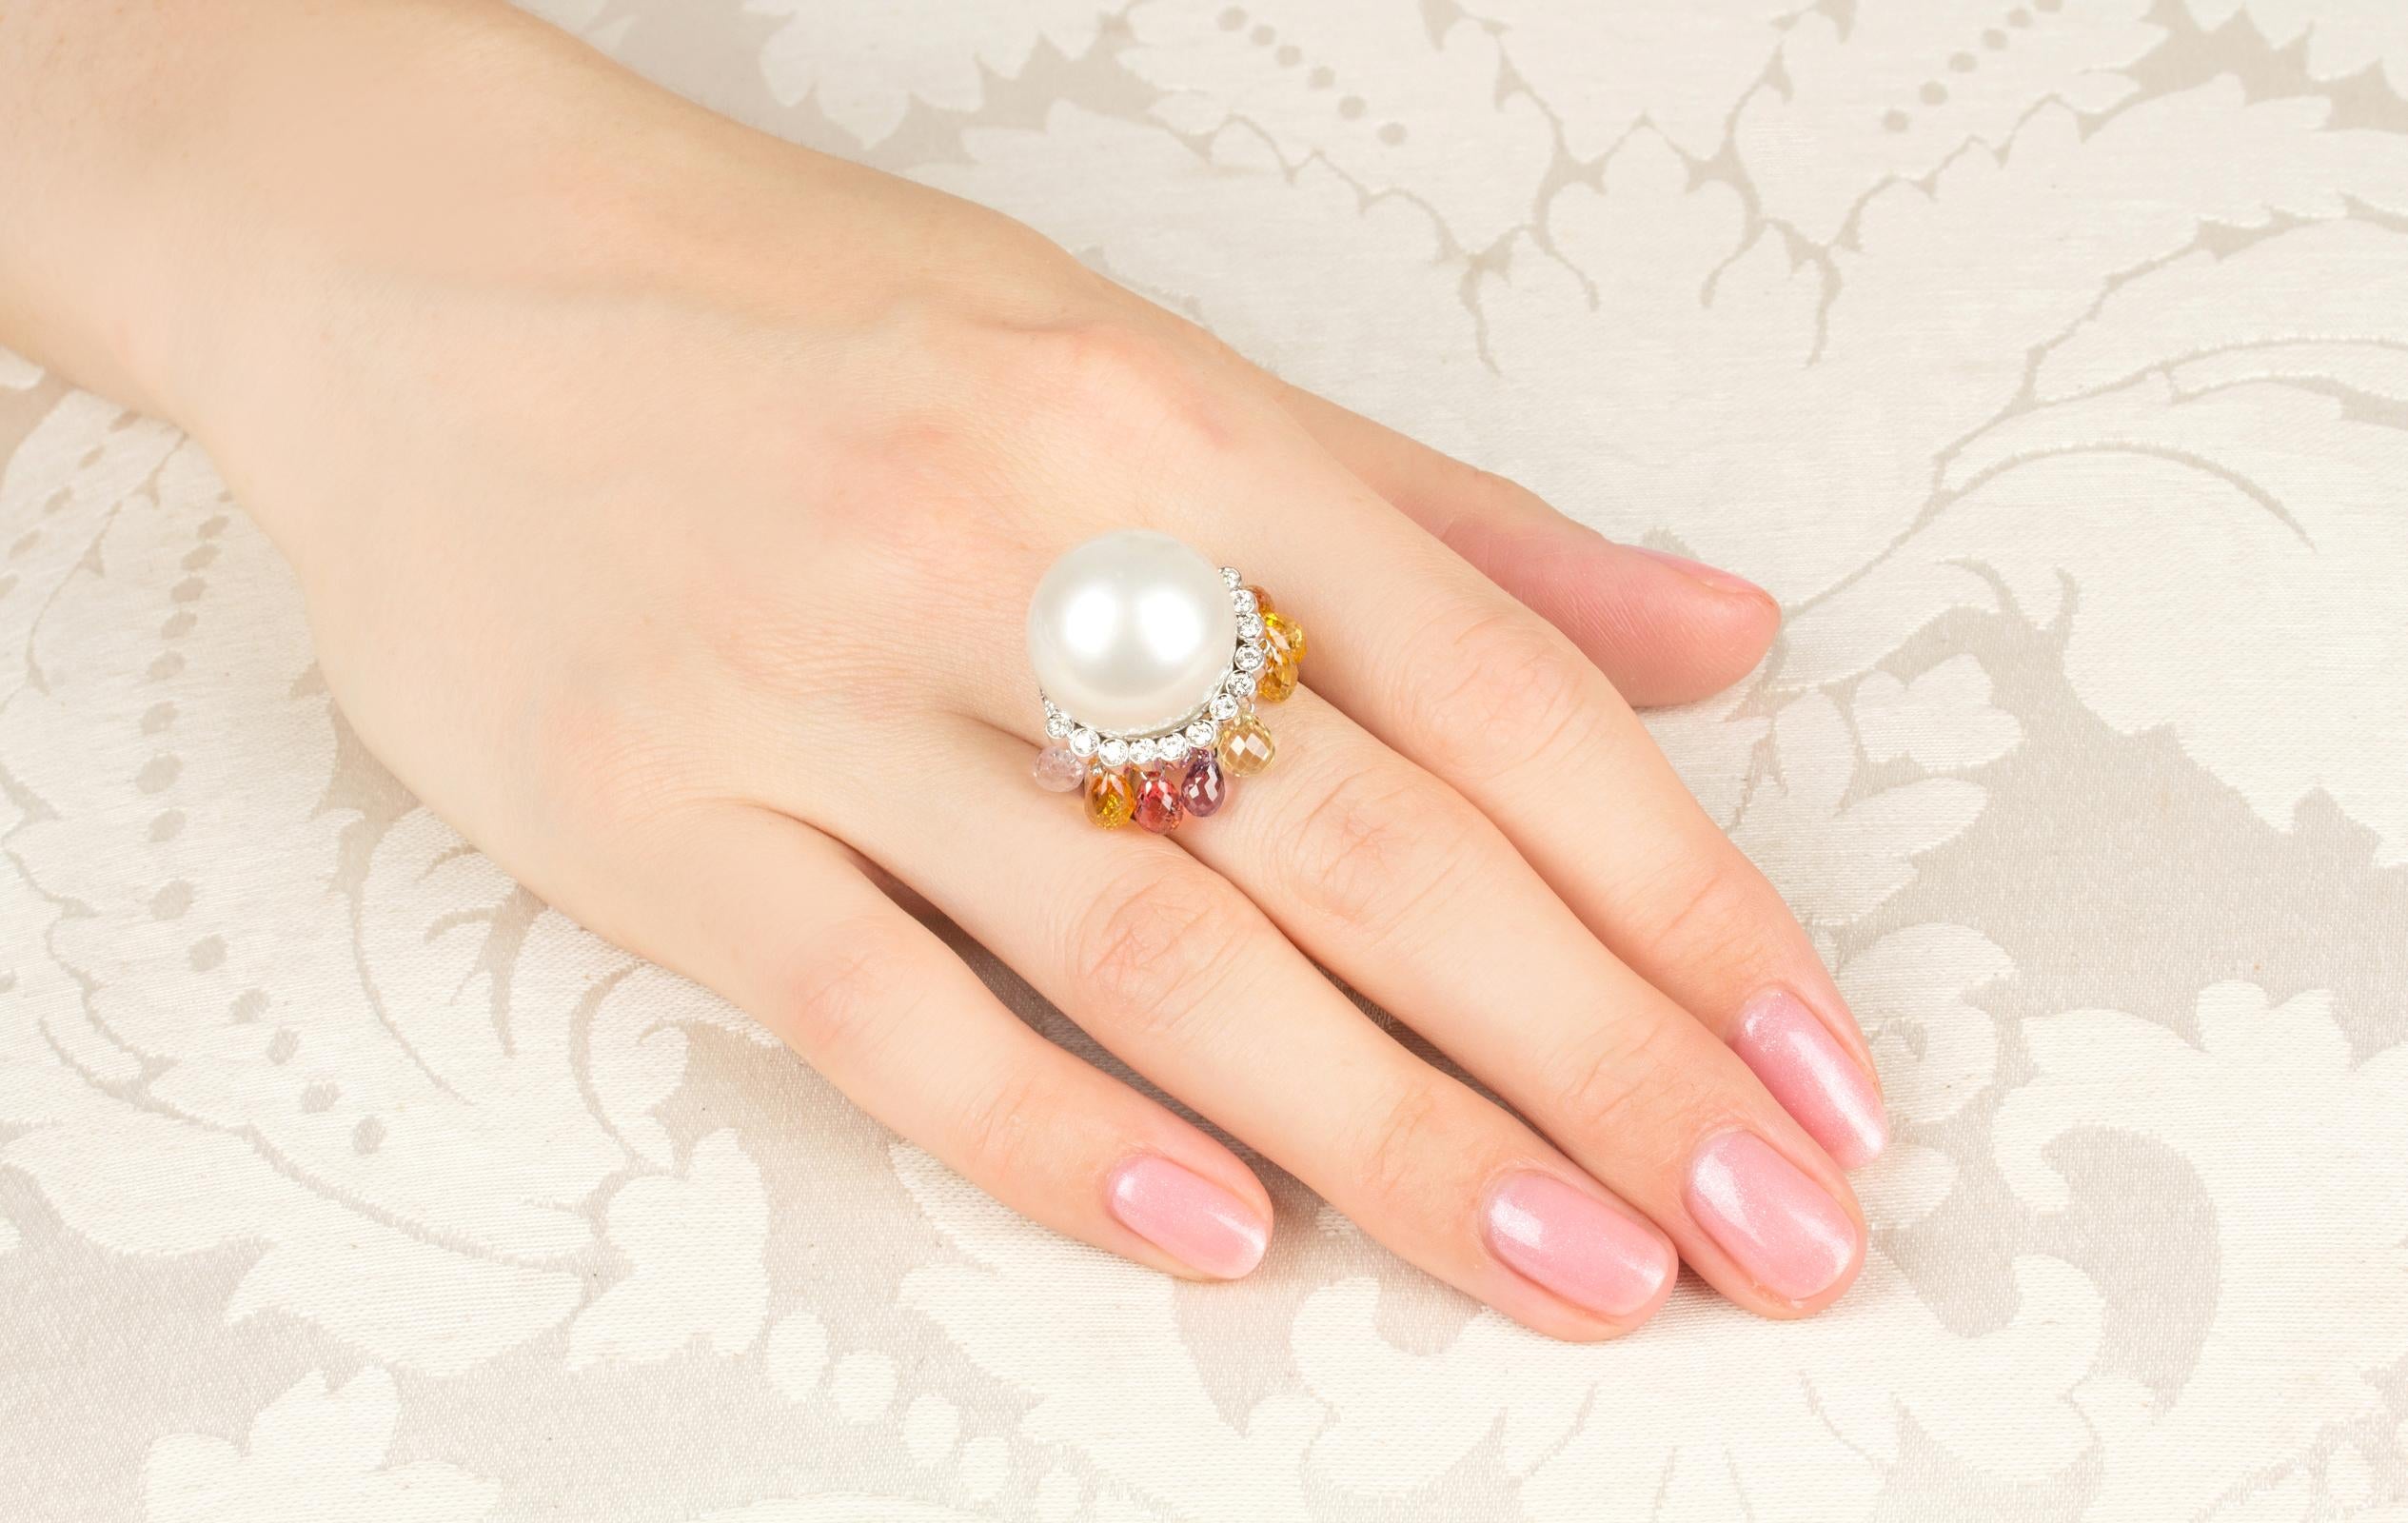 This unusual South Sea pearl and diamond cocktail ring features a splendid pearl of 17mm diameter. The pearl is untreated. It displays a fine nacre and its natural color and luster have not been enhanced in any way. The pearl is perched on a crown